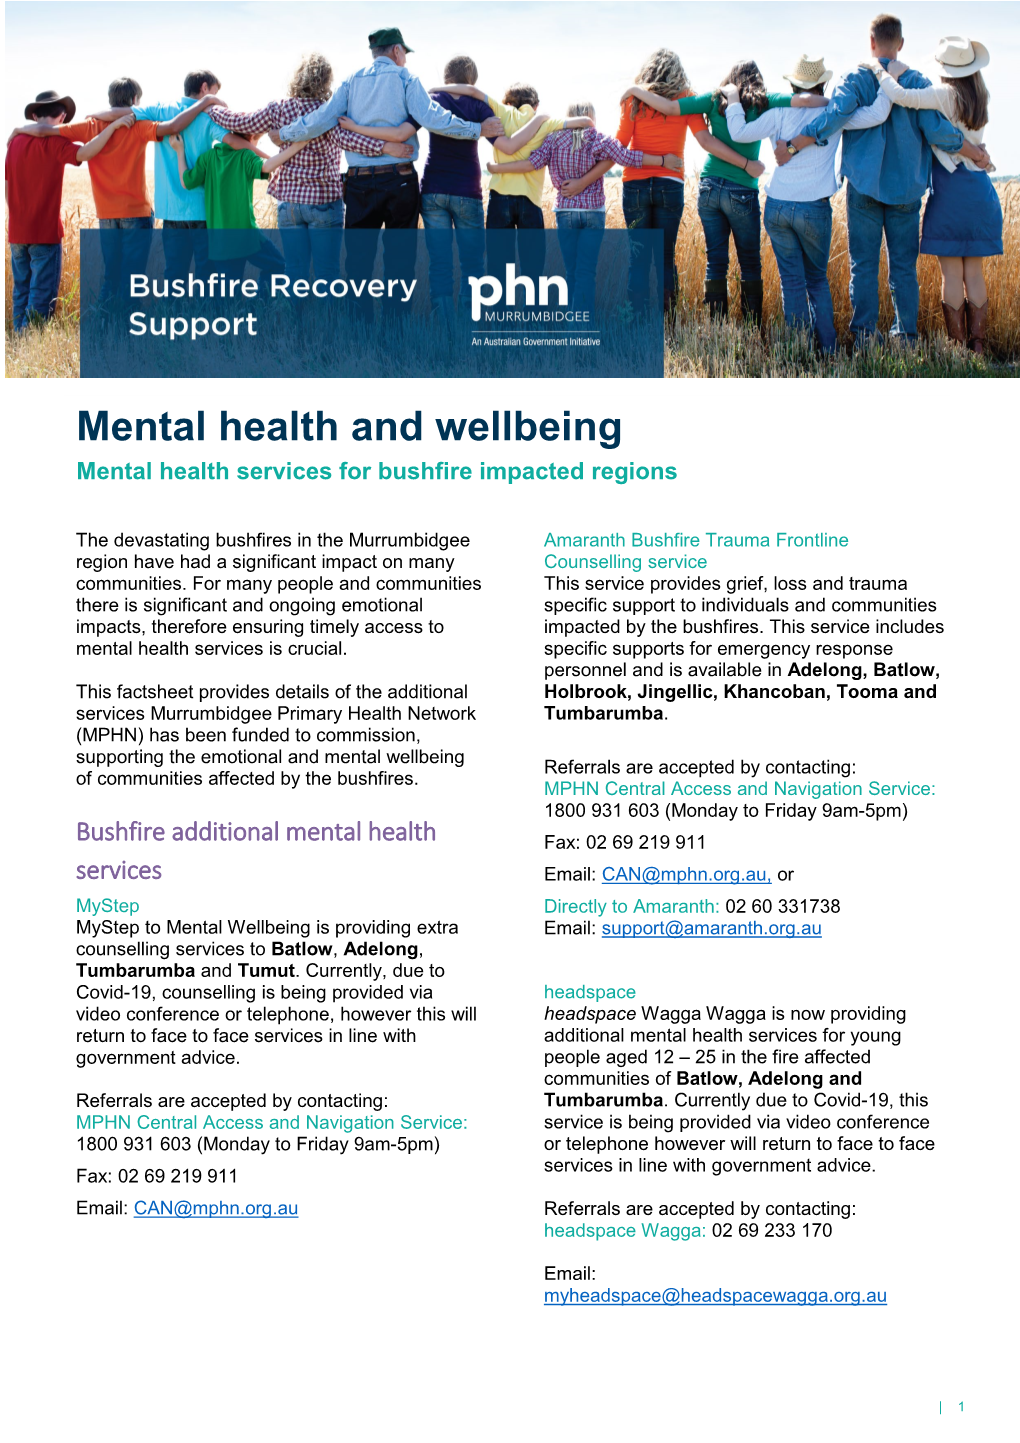 Mental Health and Wellbeing Mental Health Services for Bushfire Impacted Regions